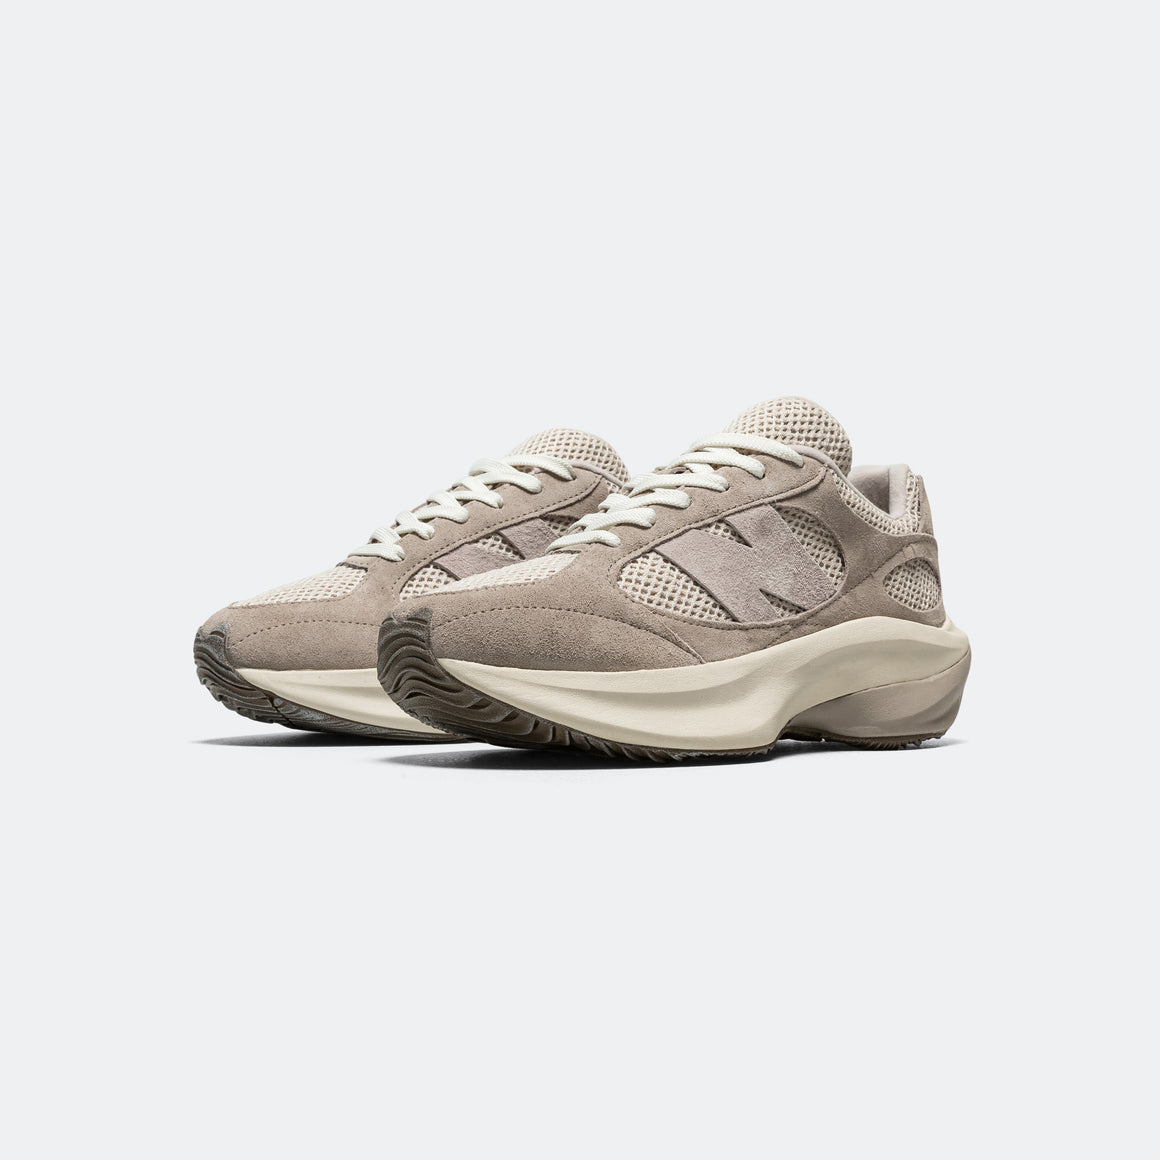 New Balance - WRPD Runner - Grey Day - UP THERE